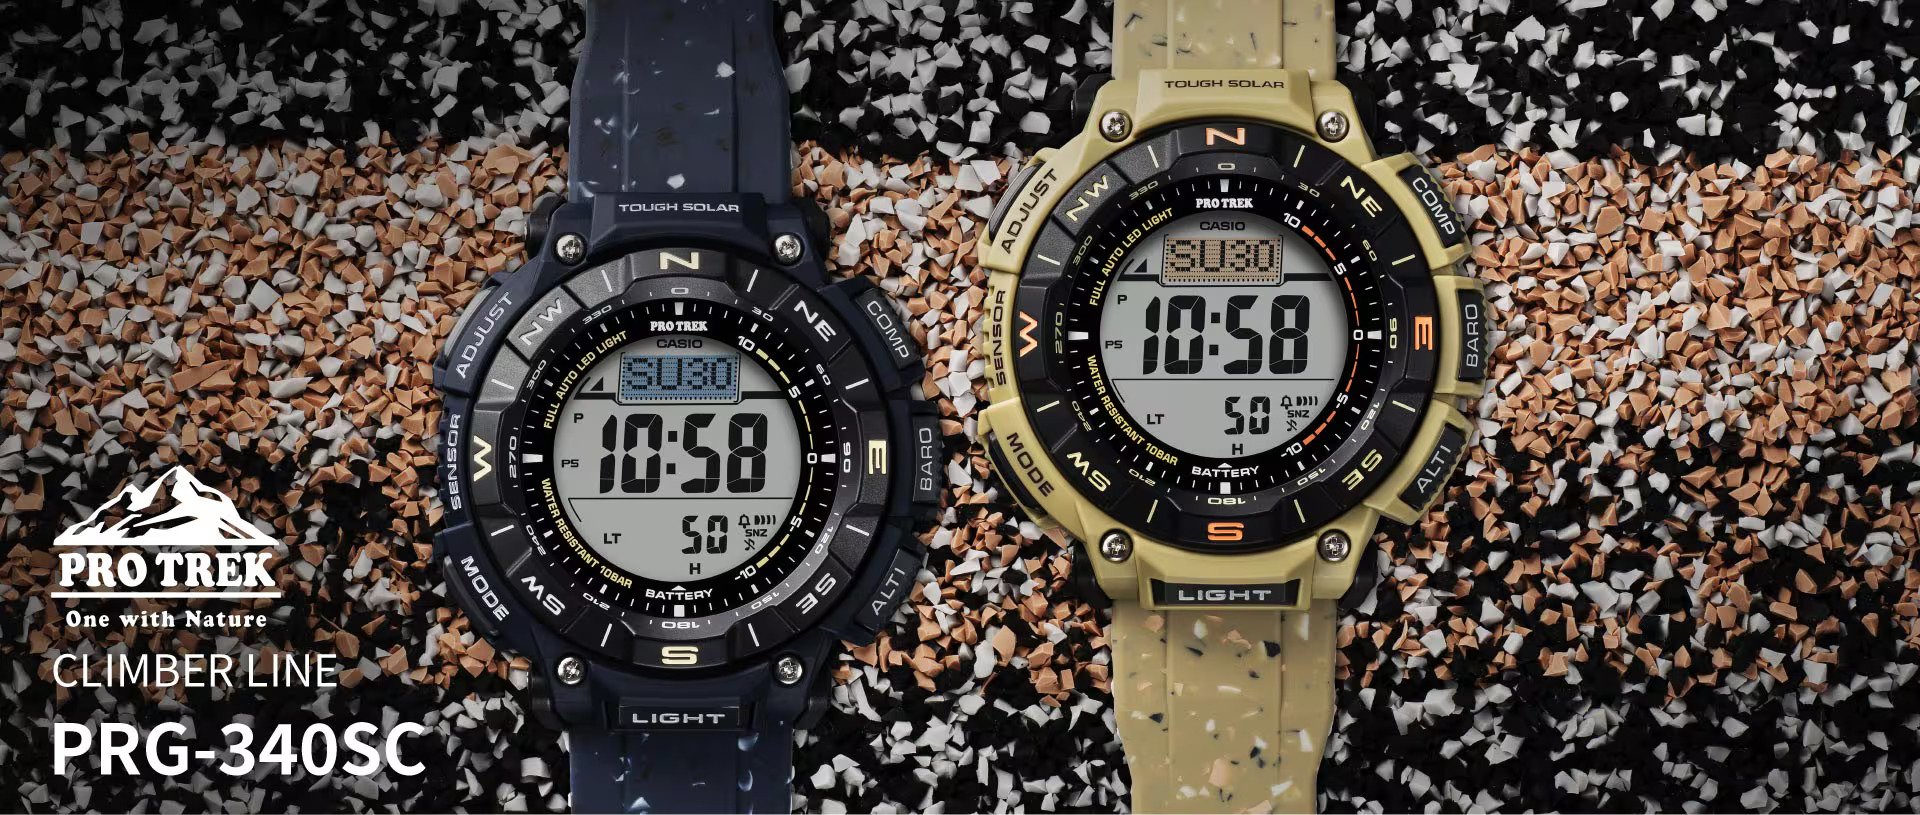 Casio PRO TREK PRG-340SC watches with built-in digital compass, altimeter, and thermometer launched - News - News